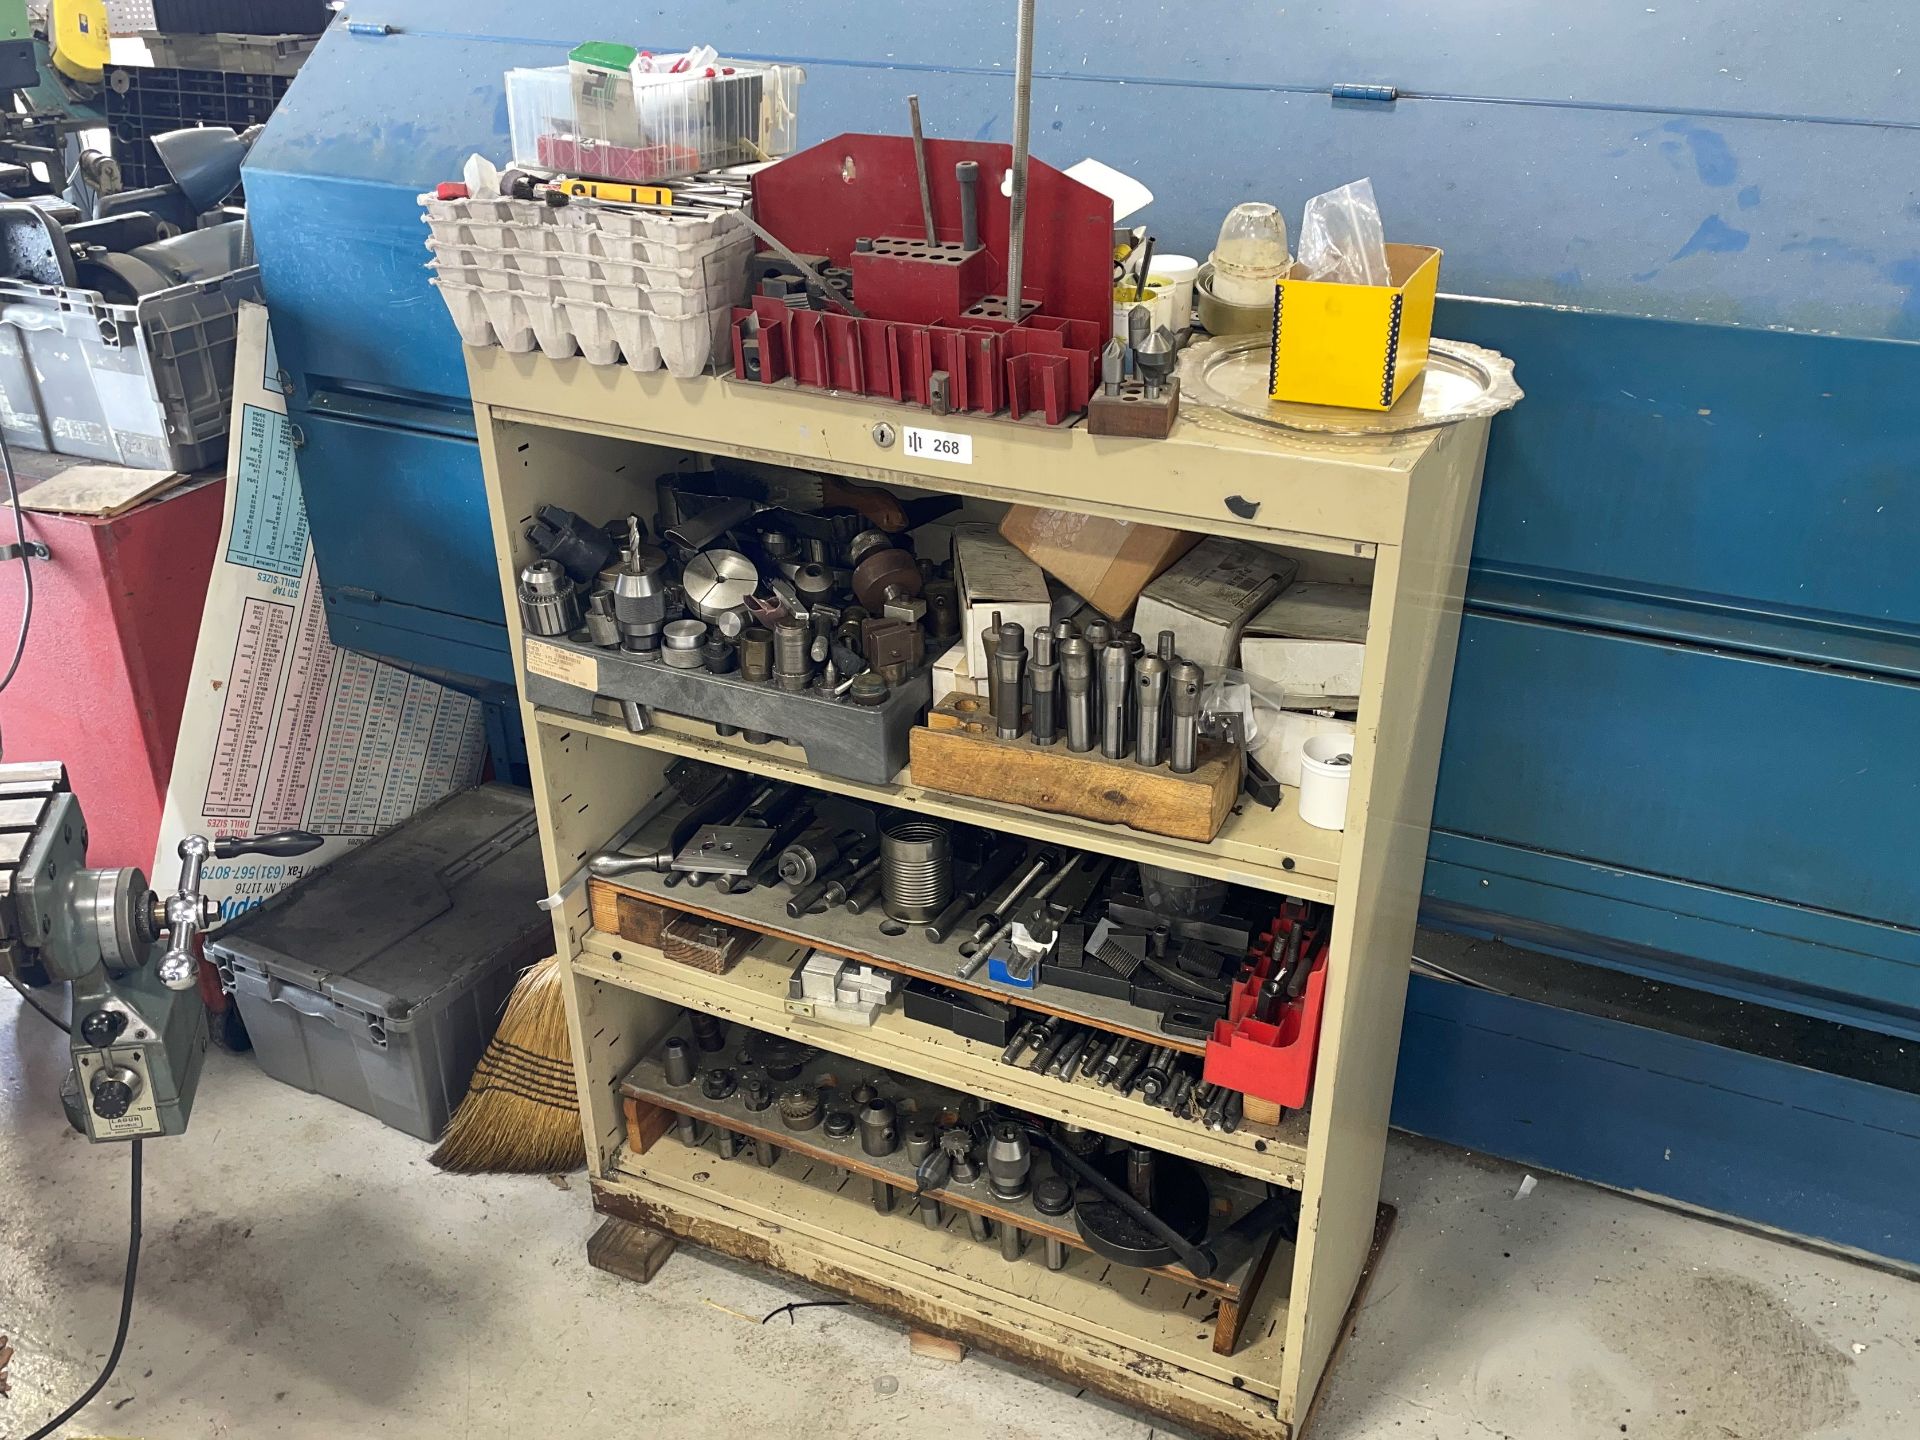 Metal Shelving Unit with Contents of Bridgeport Tooling and Accessories